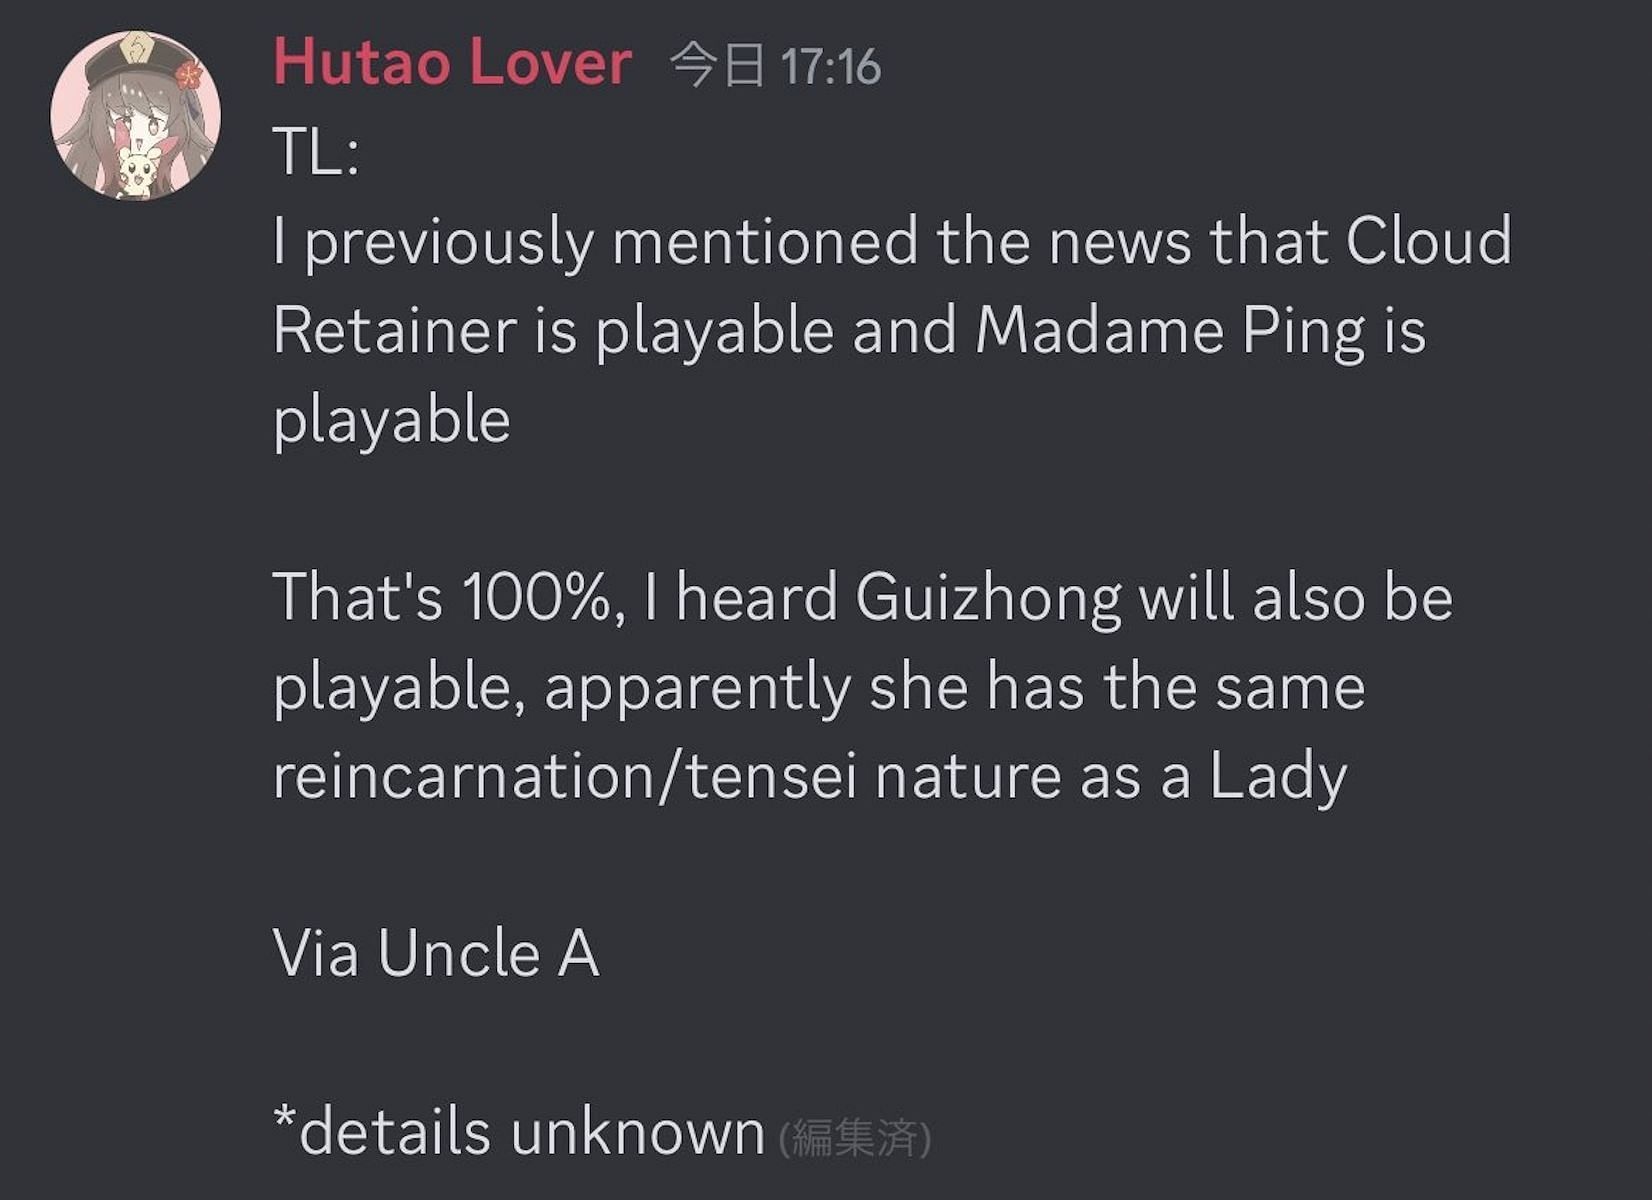 A text leak worth viewing (Image via Hutaolover77)